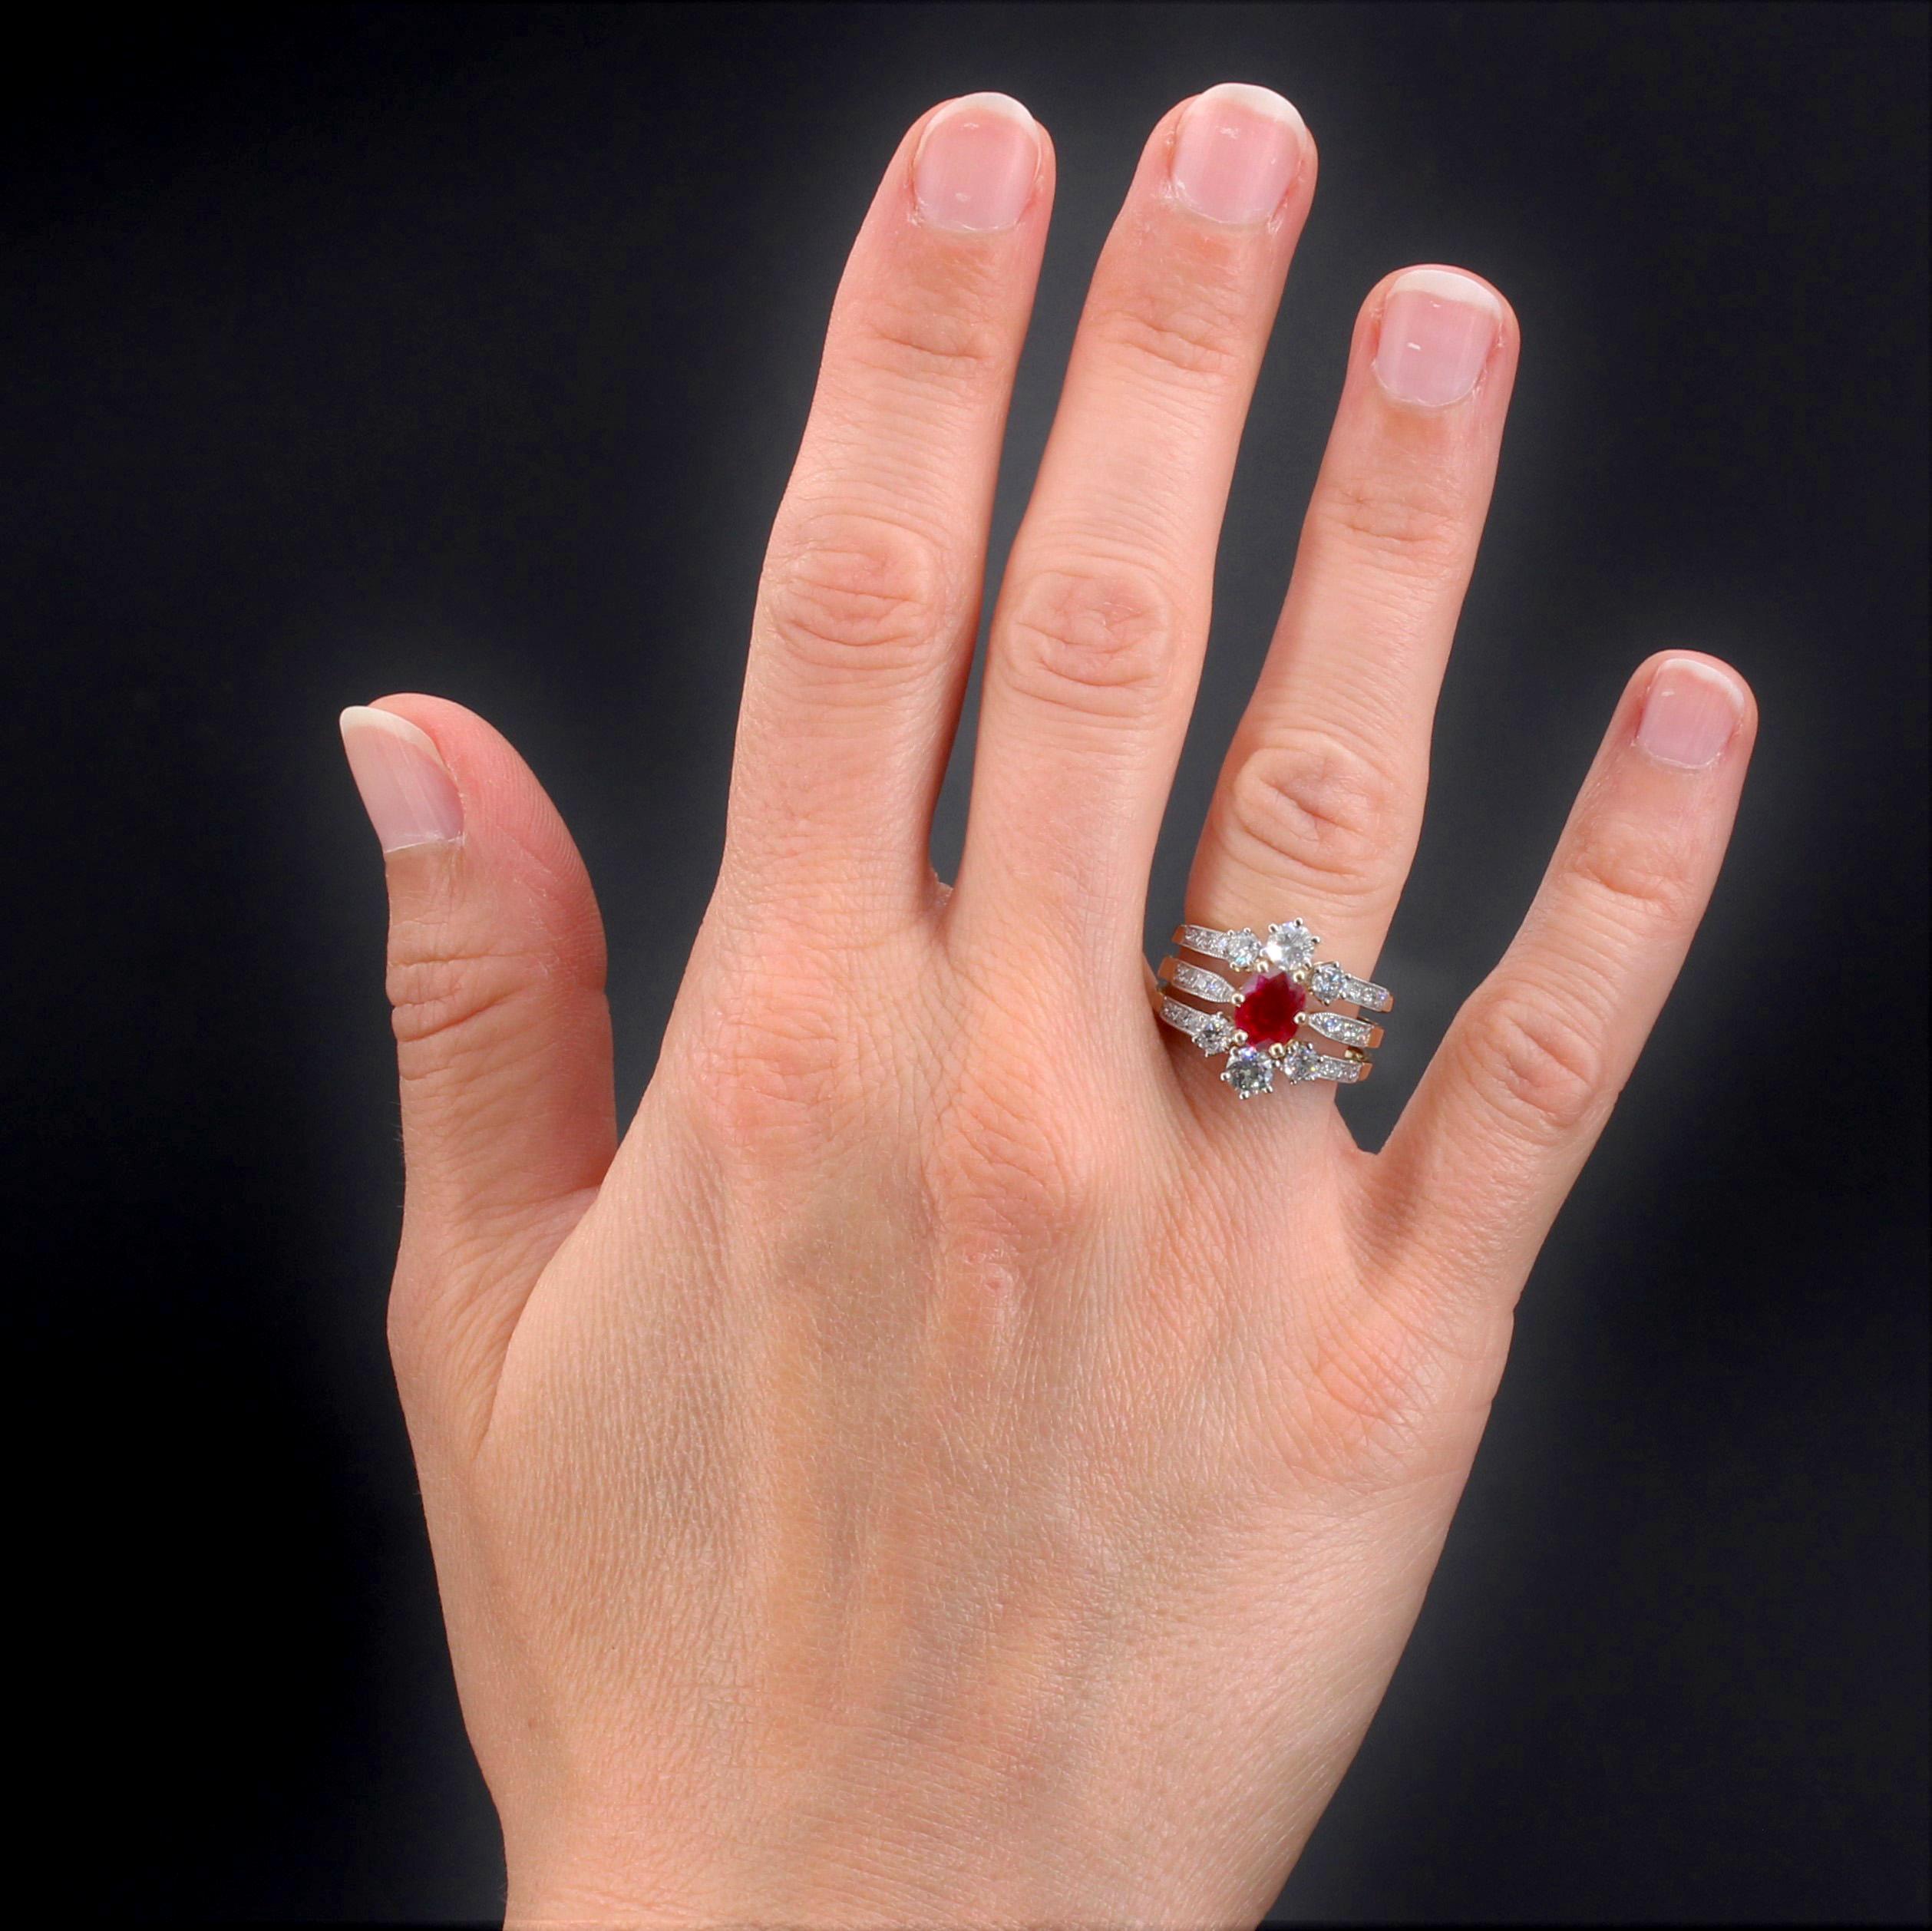 Ring in 18 karat yellow gold, eagle head hallmark and platinum.
Magnificent, this ruby-diamond ring is set with claws on the top of an oval ruby surrounded on the top and bottom by 2 x 3 modern brilliant-cut diamonds also set with claws. 3 rings